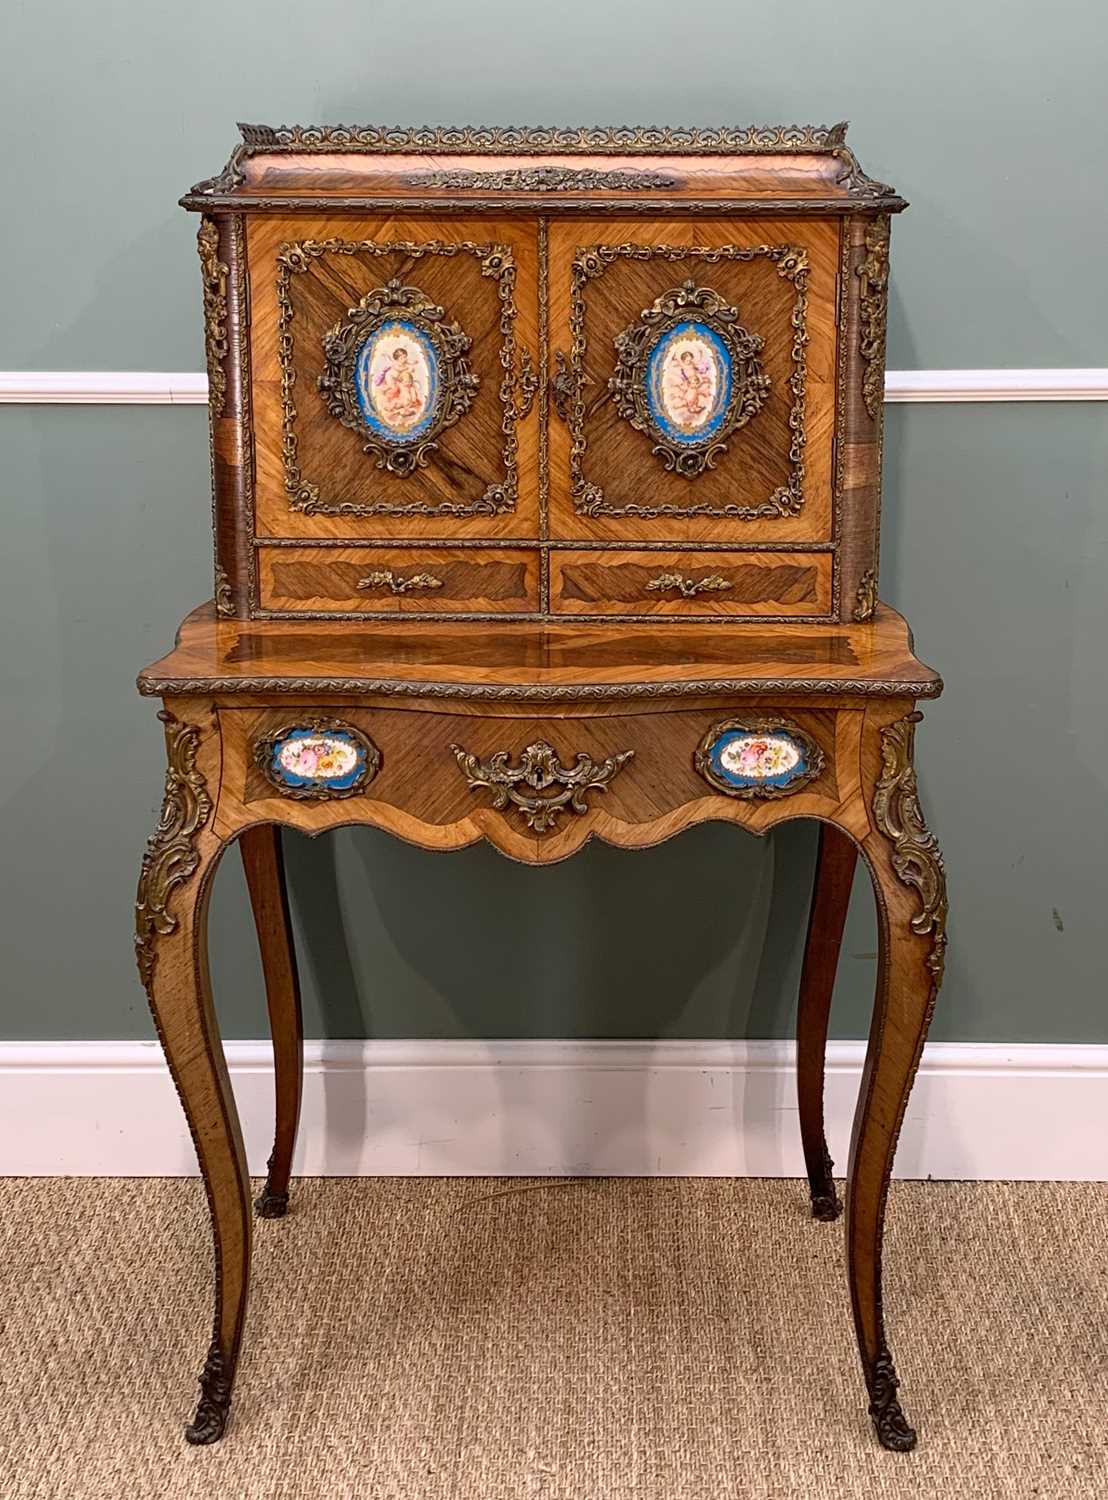 GOOD PORCELAIN & GILT BRONZE MOUNTED BONHEUR DU JOUR, 19th Century, in kingwood and rosewood with